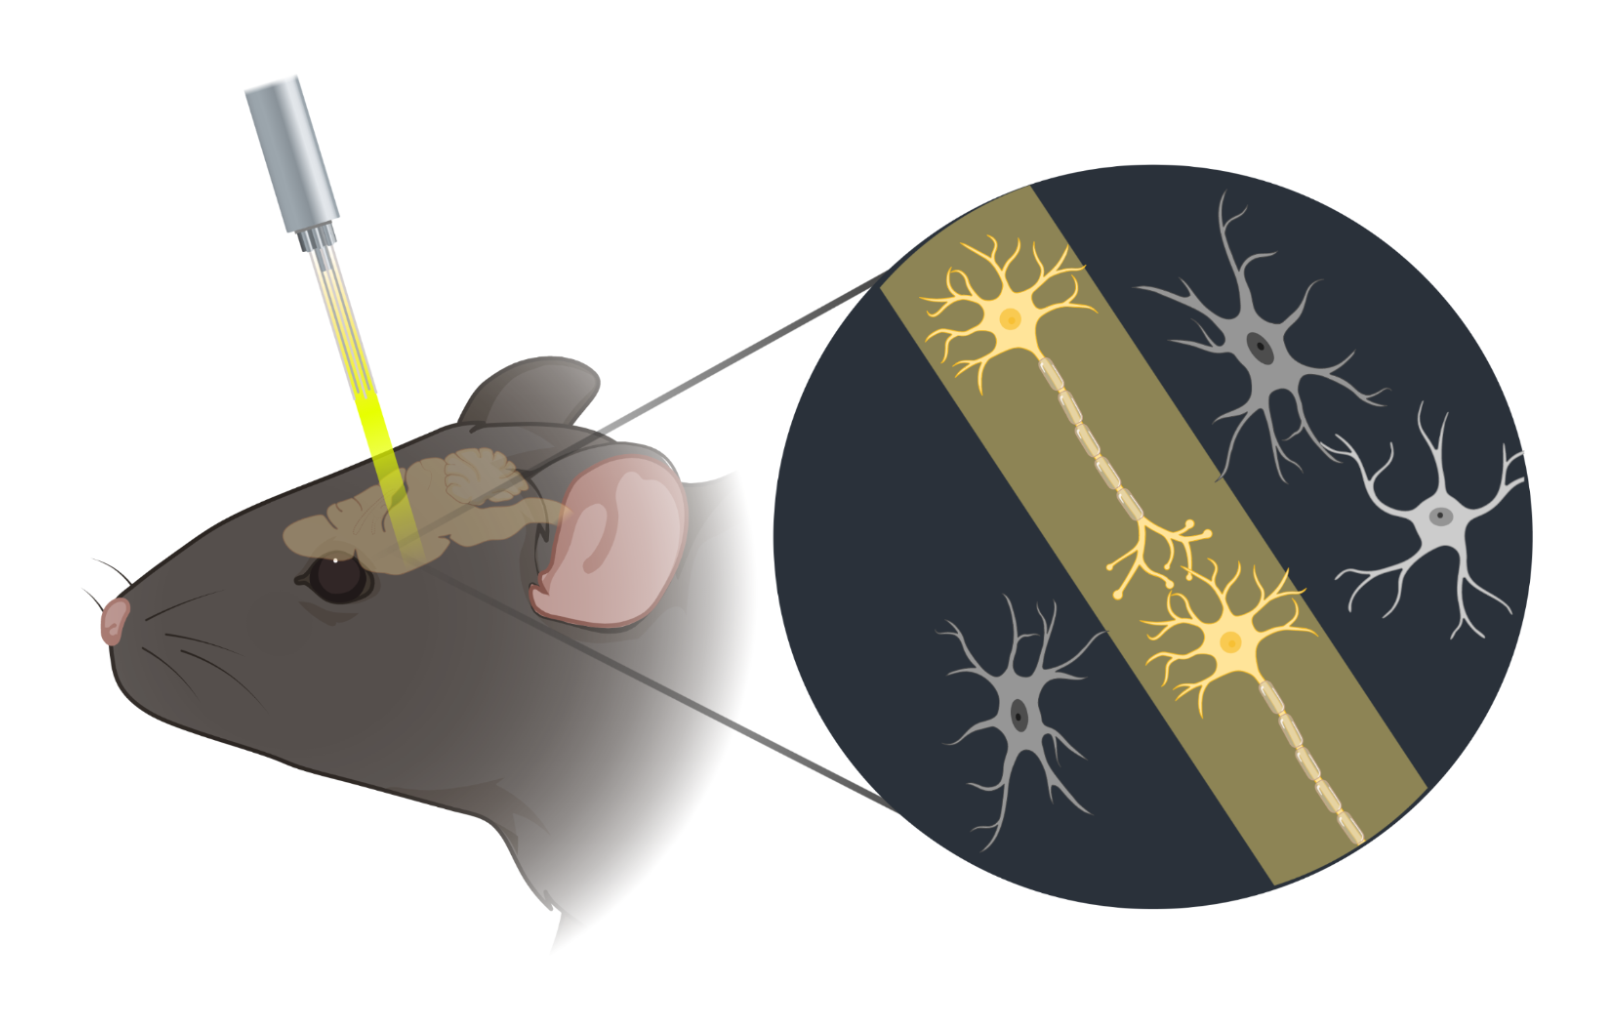 A rat is shown, its head translucent to show the brain within. A fiber optic is shining yellow light into the brain, which is zoomed in to show it impacting certain neurons but not others.